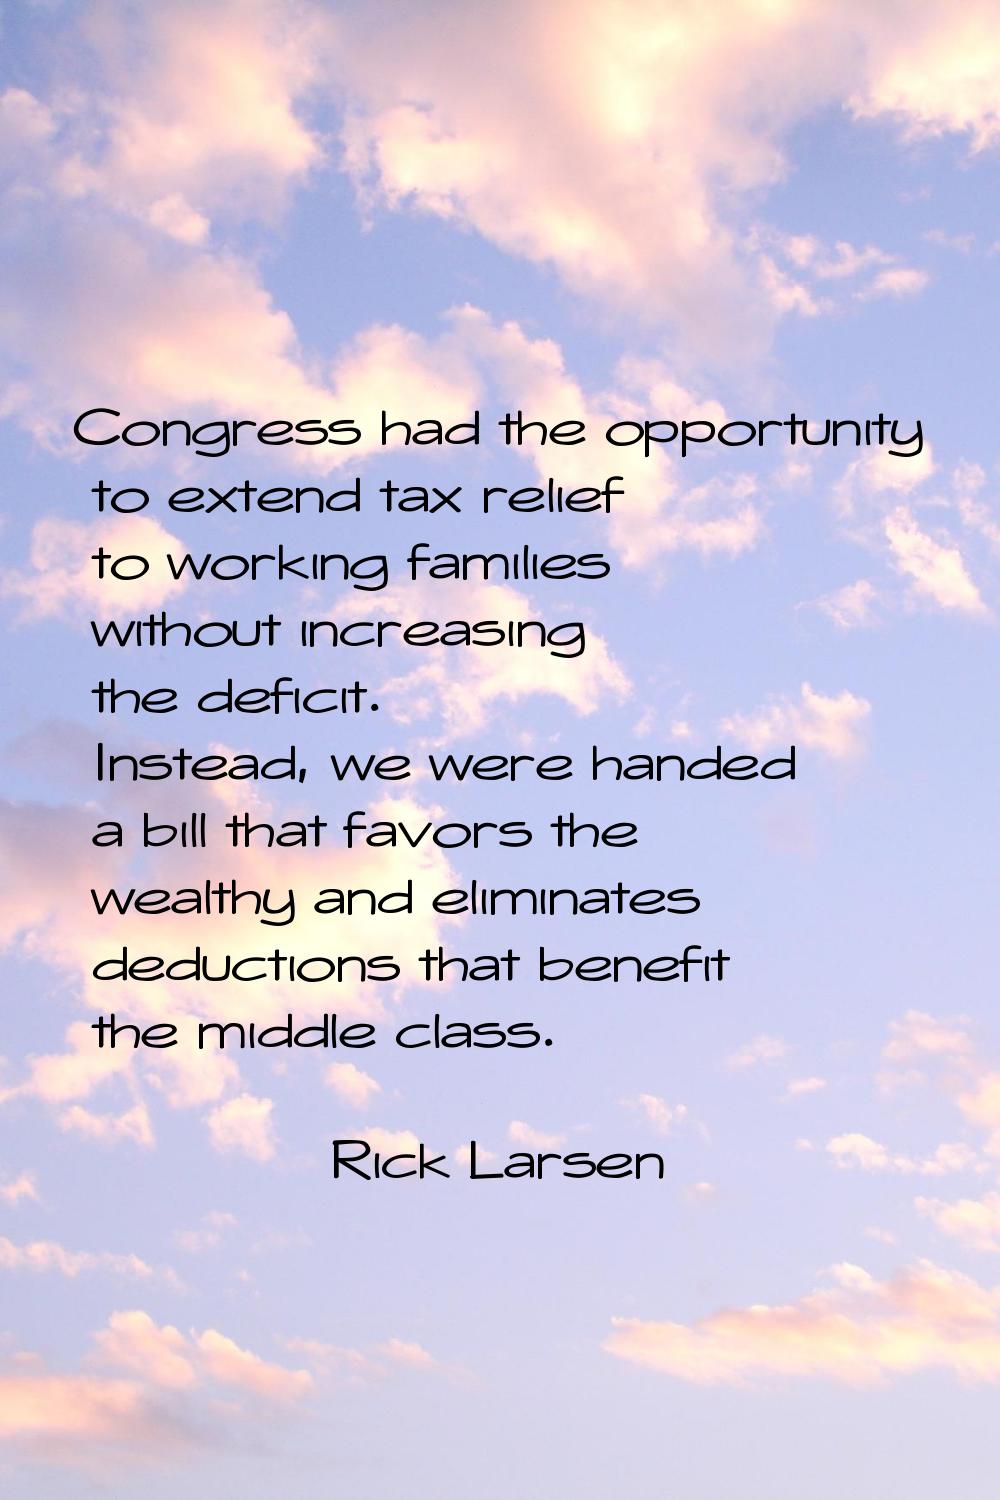 Congress had the opportunity to extend tax relief to working families without increasing the defici